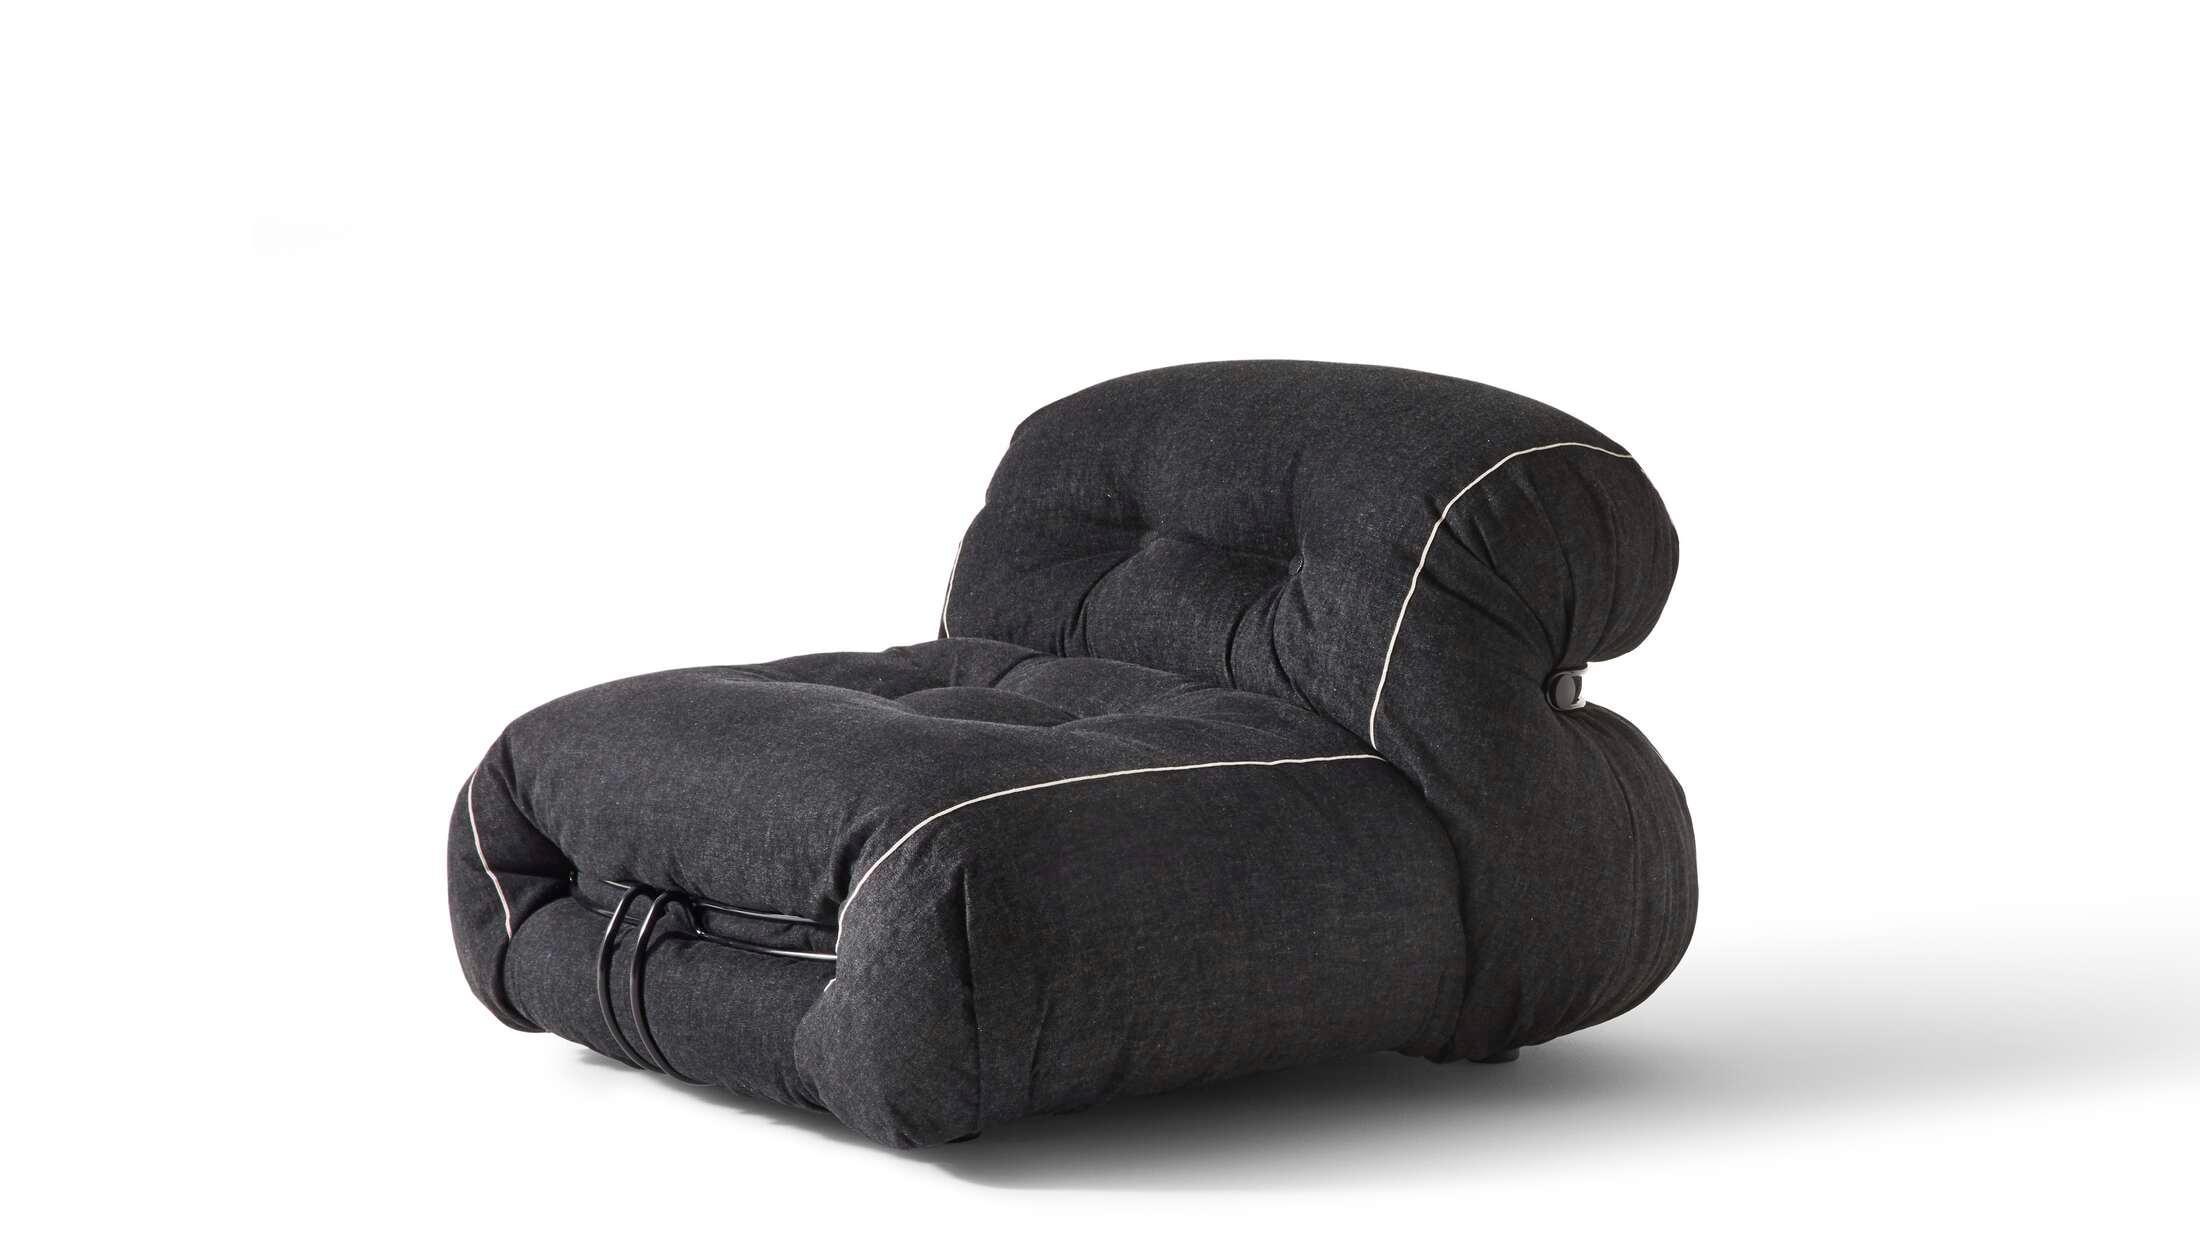 Limited Edition Soriana Denim Armchair by Afra & Tobia for Cassina, Italy - new 1